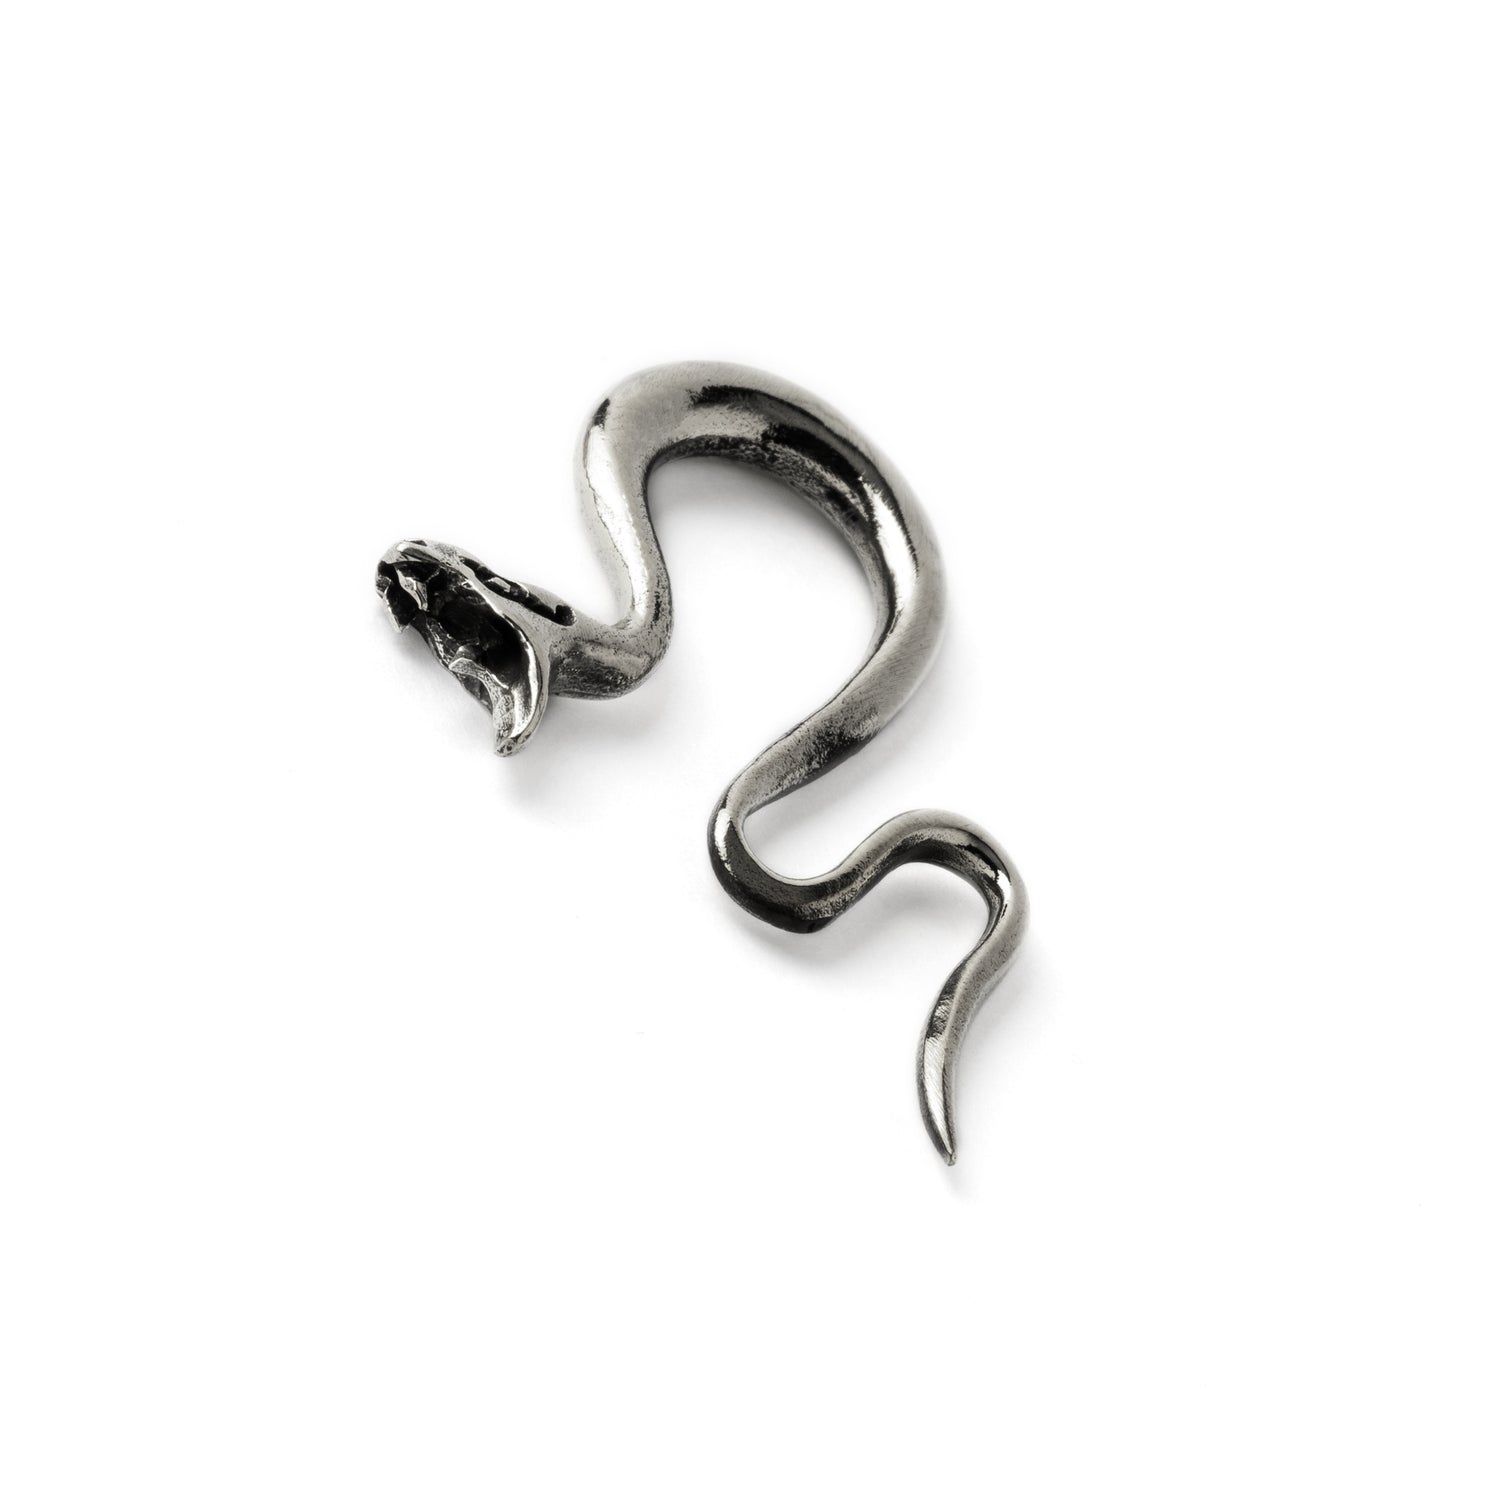 silver brass serpent ear hanger stretcher for stretched ears side view